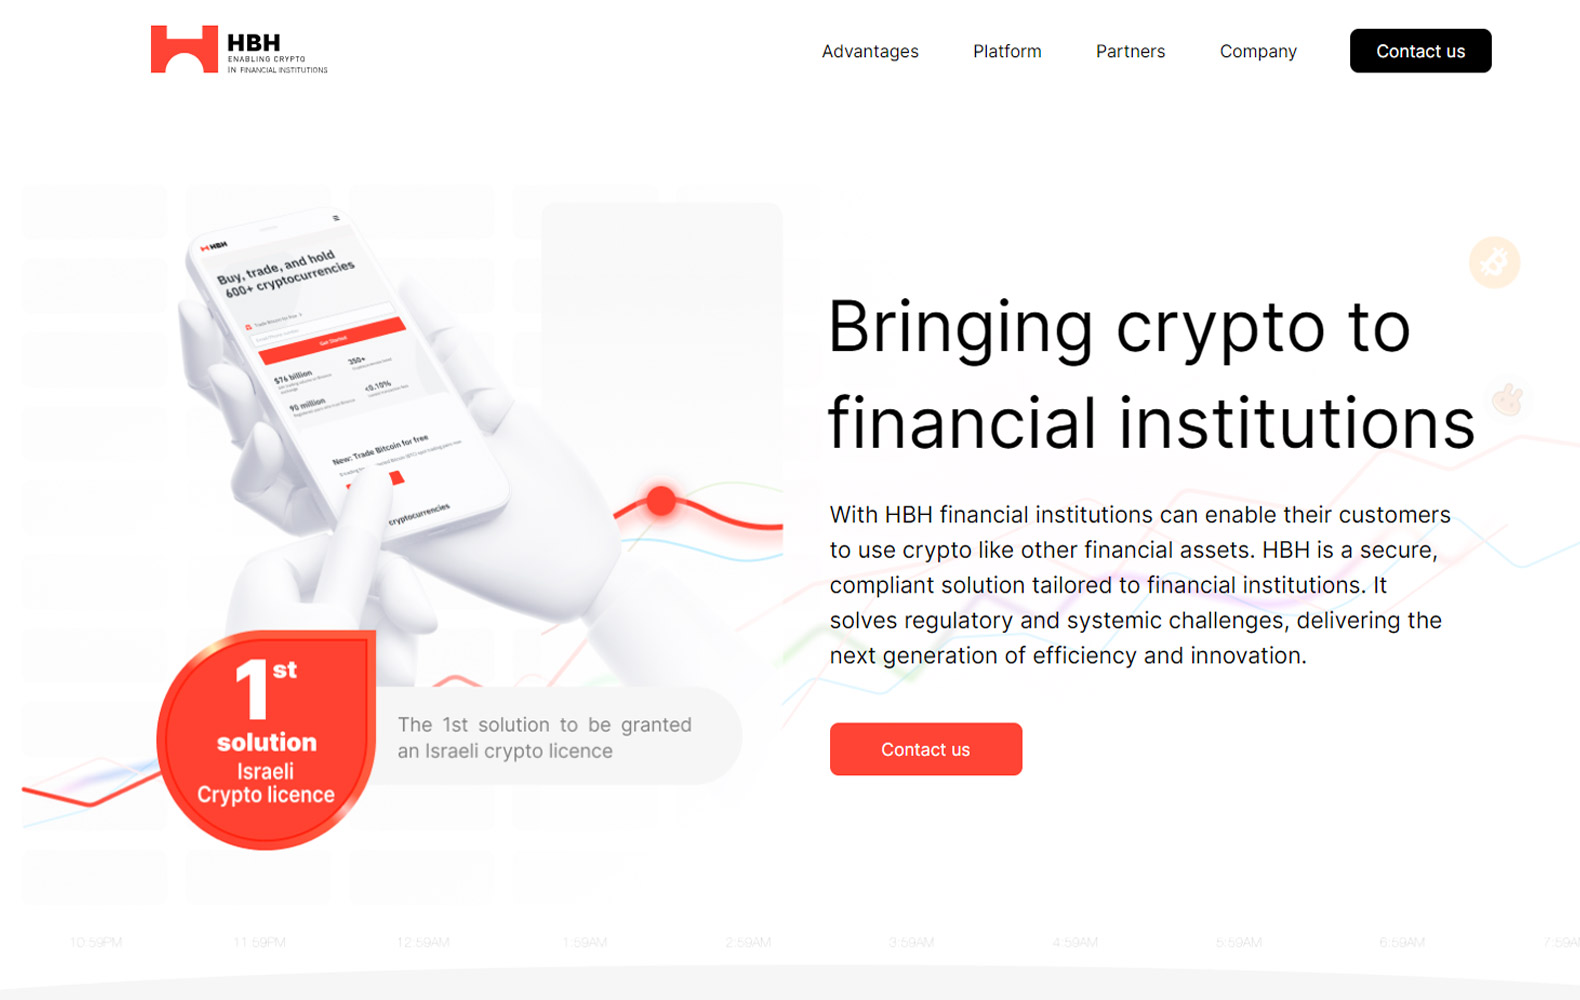 HBH Bringing Crypto to Financial Institutions